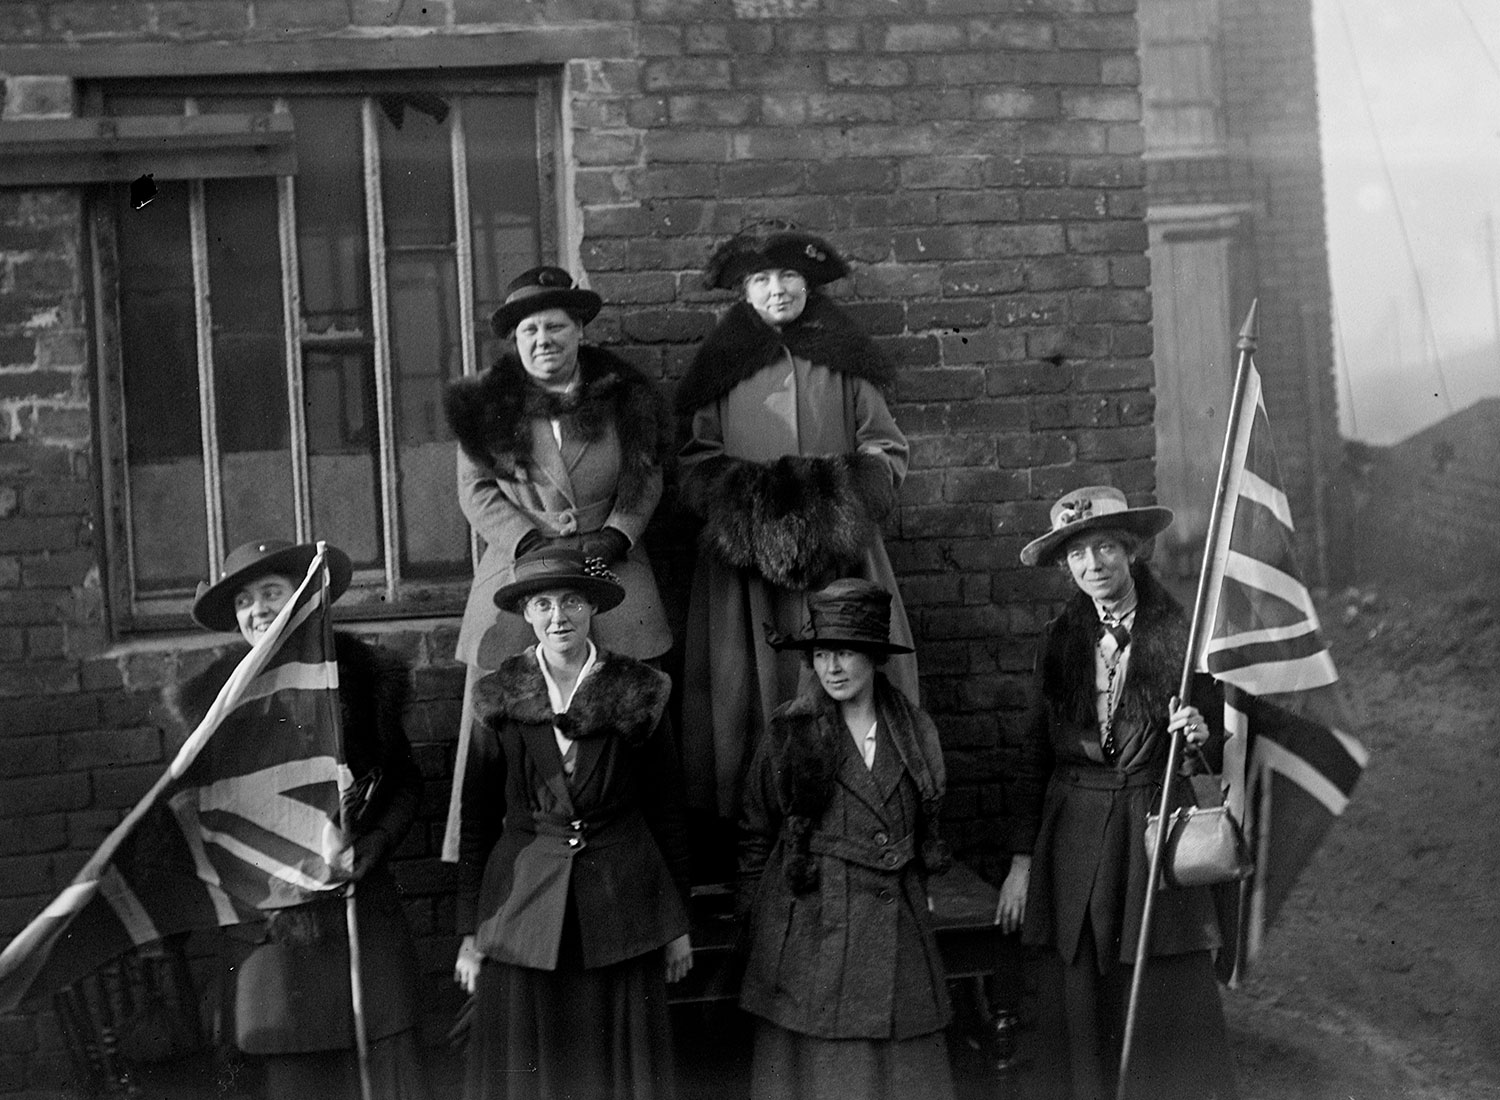 The launch of Christabel Pankhurst's election campaign in Smethwick, 28 November 1918. (Topfoto)